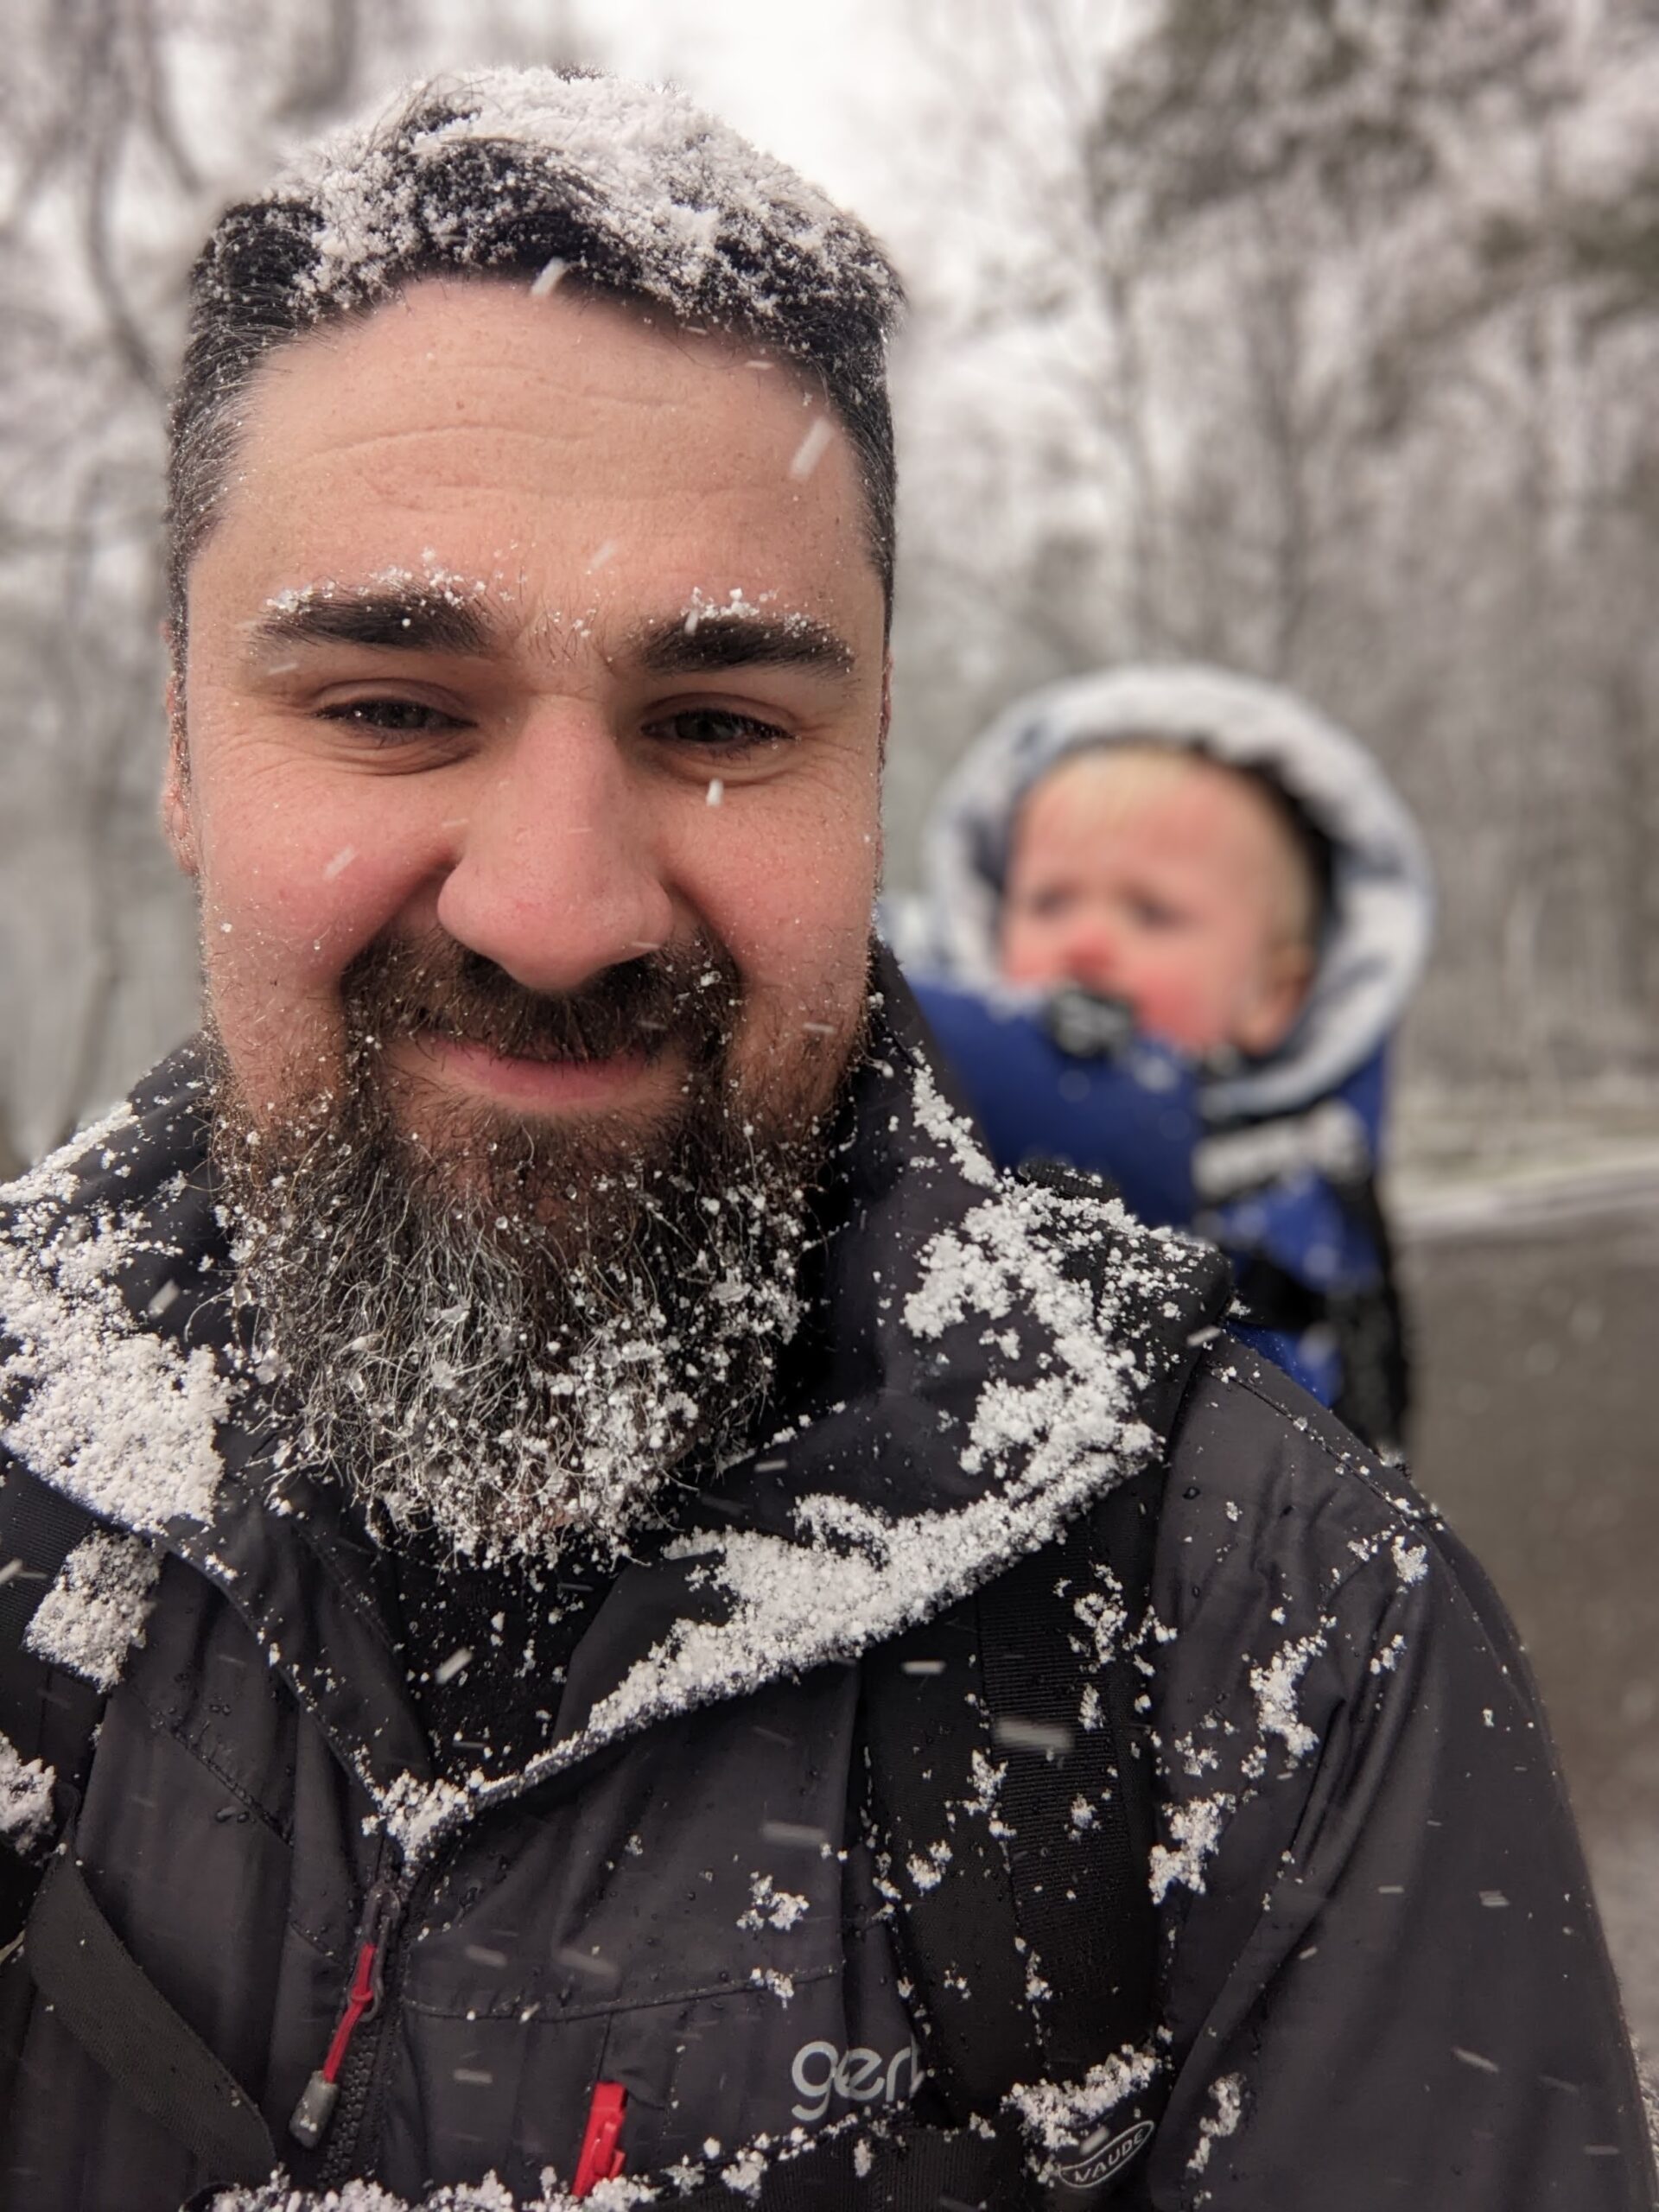 Jacob loves walking whatever the weather.